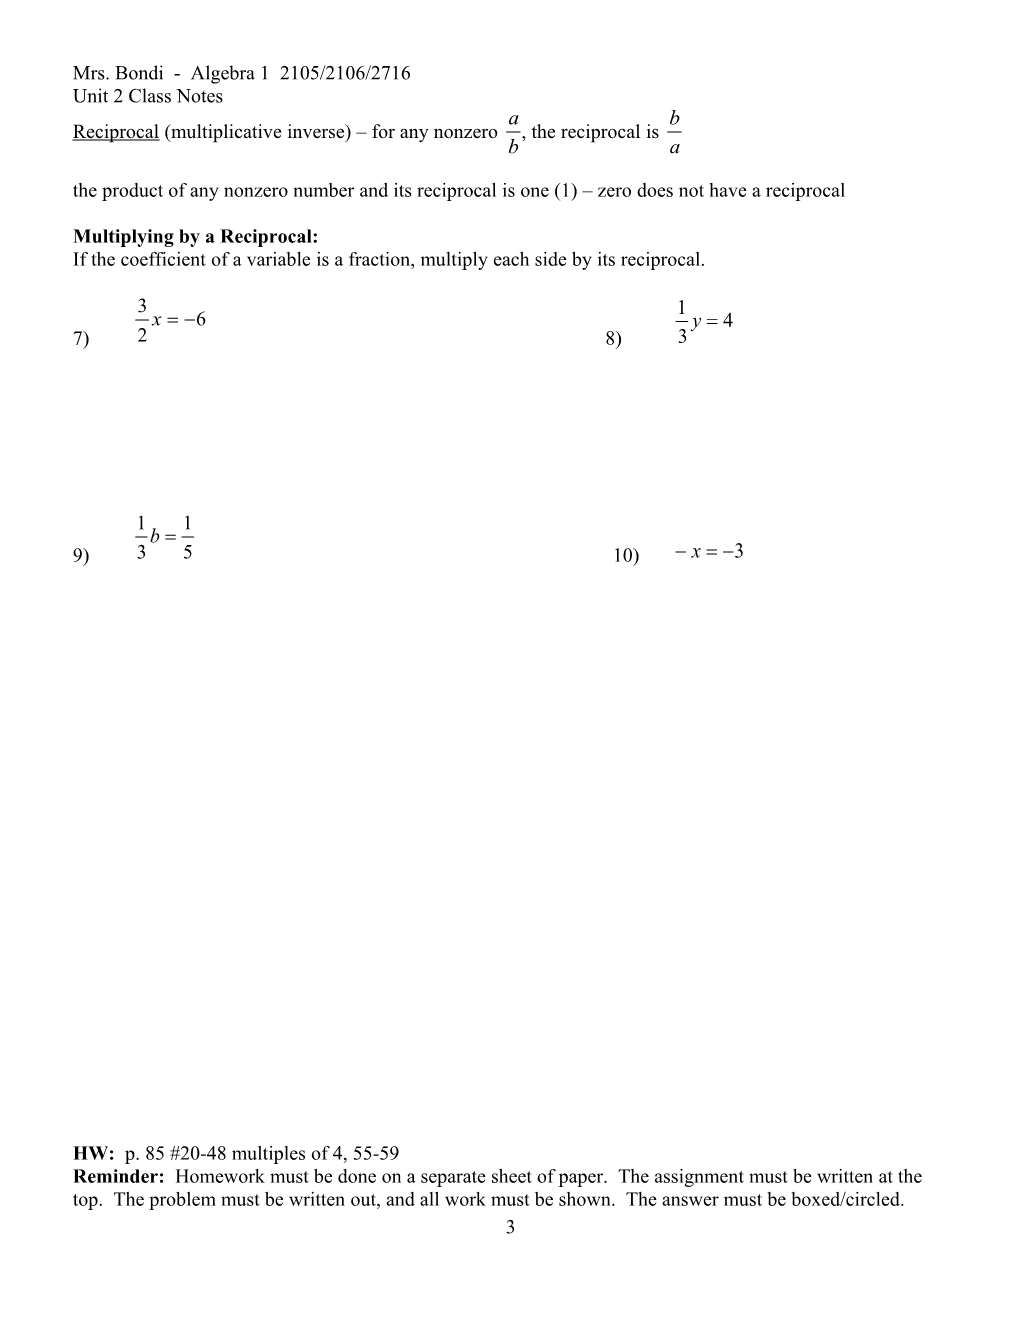 Lesson 1 Solving One-Step Equations (PH Text 2.1, 2.2)